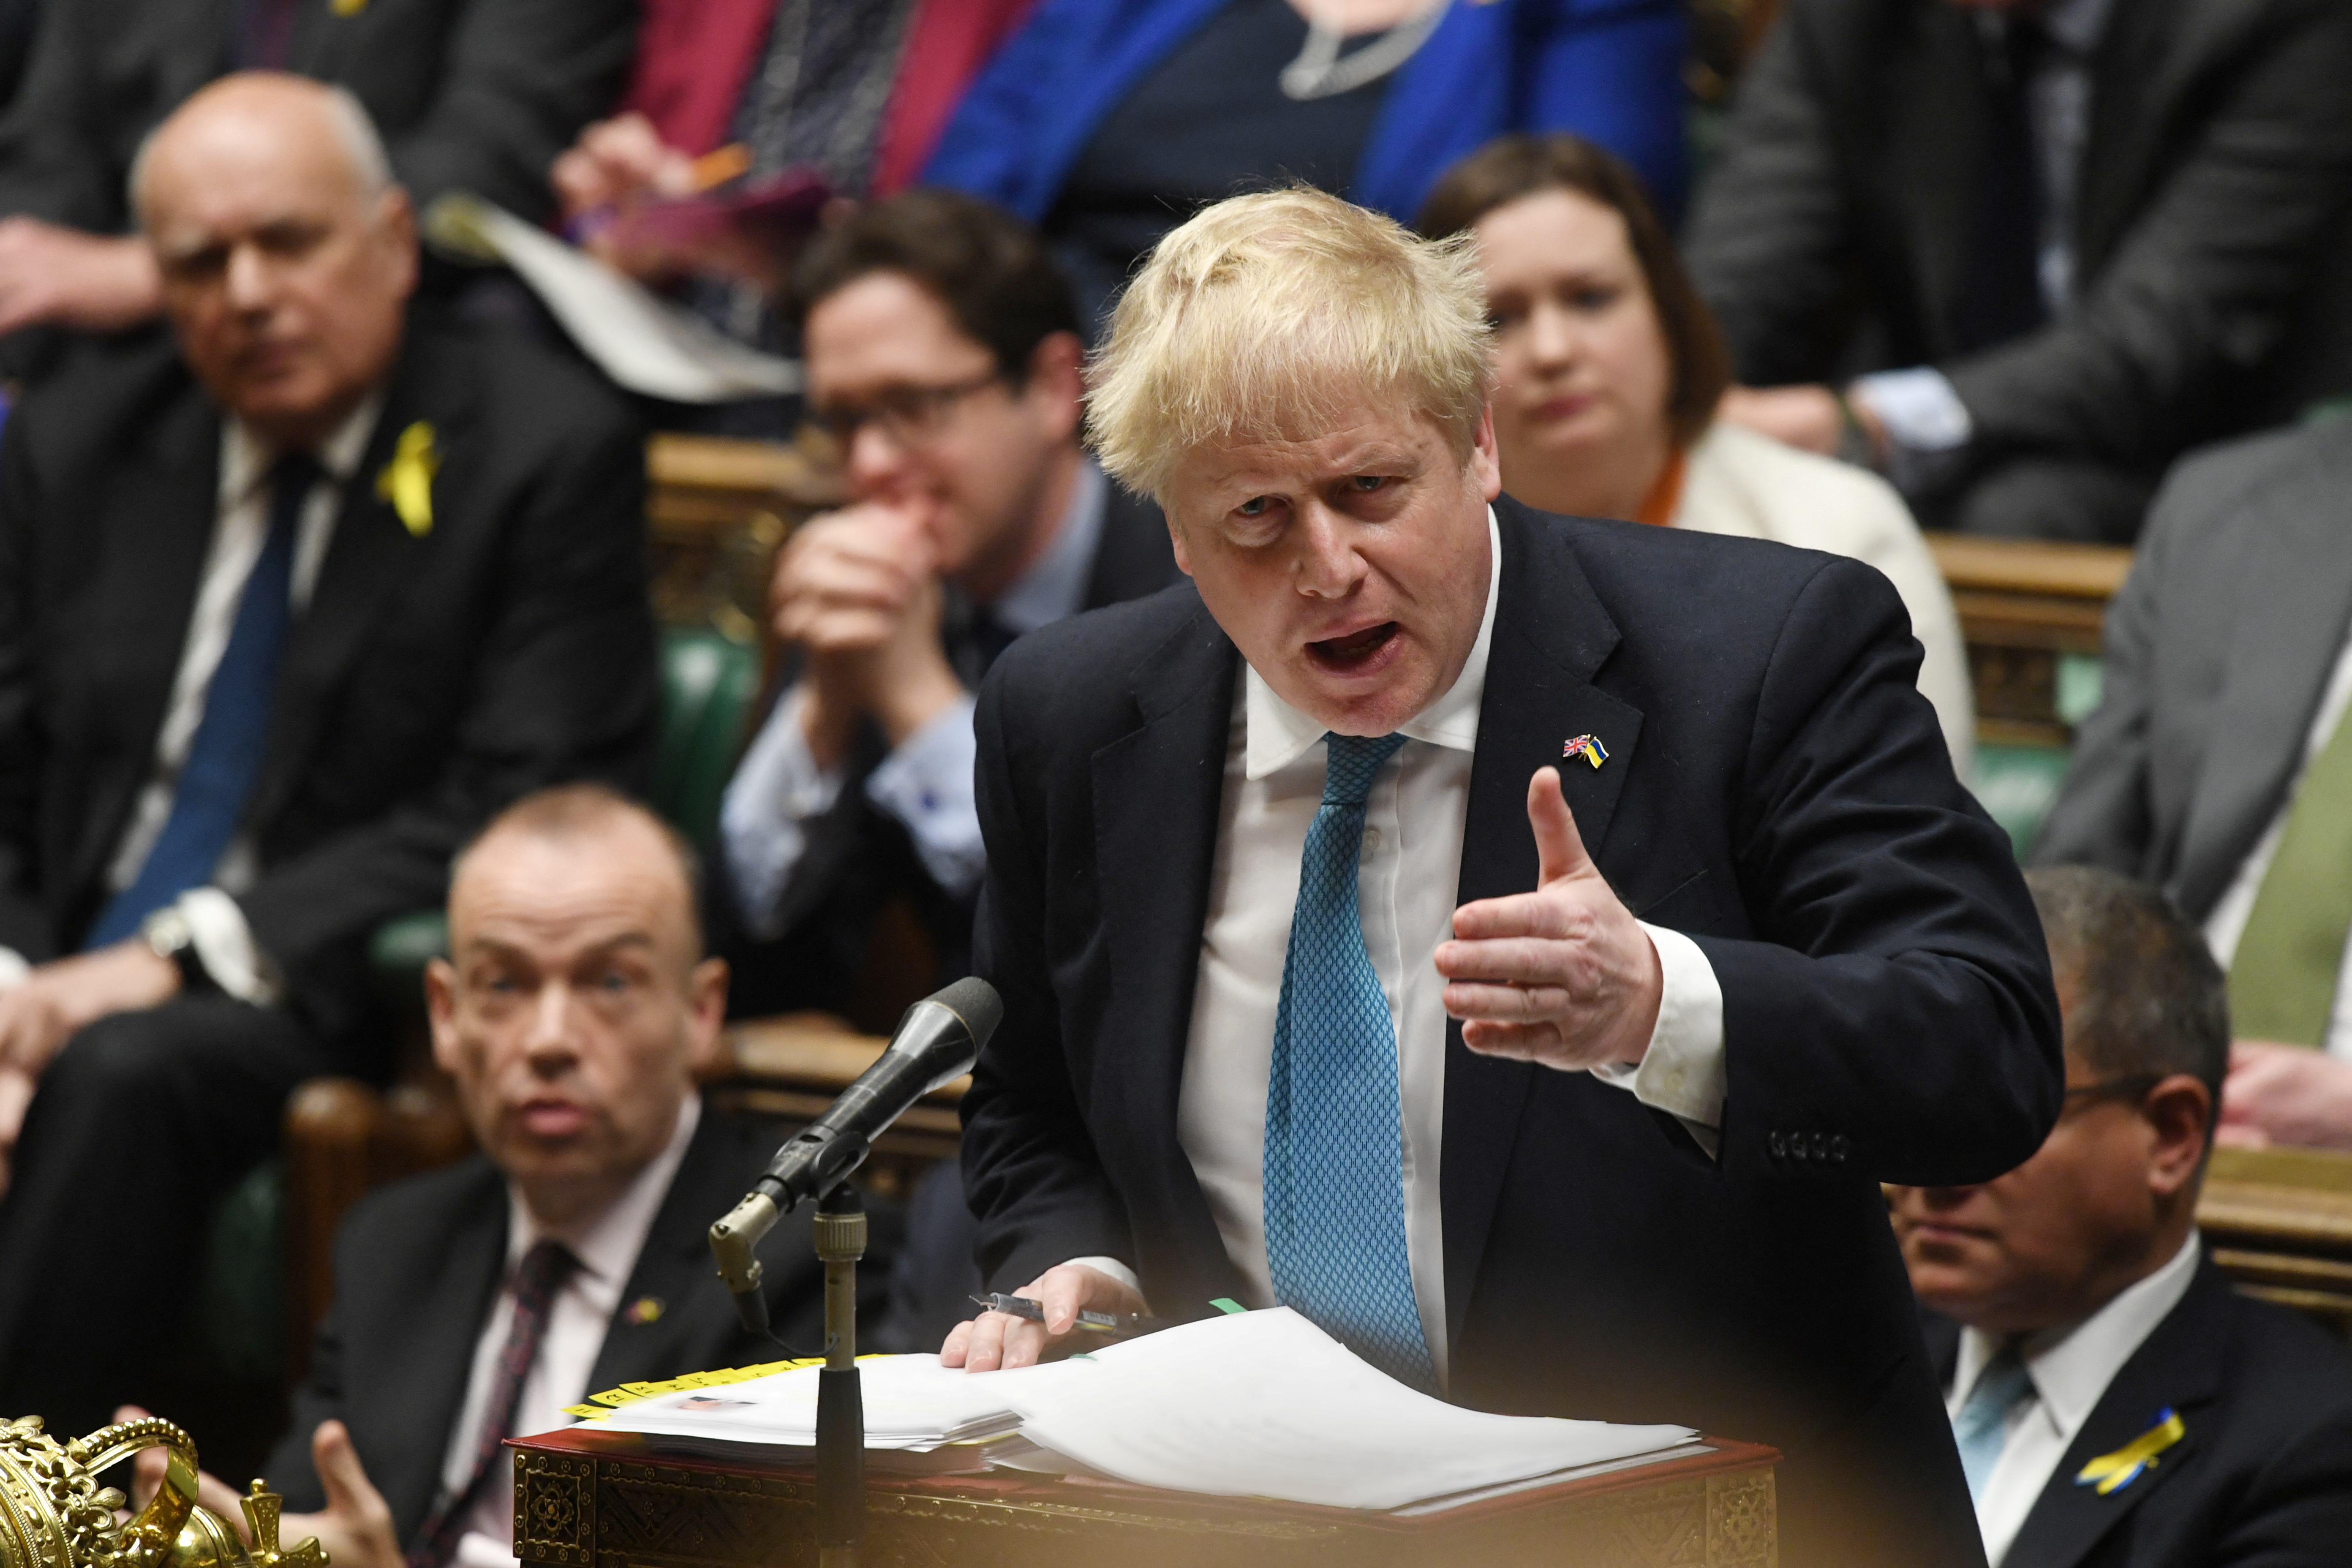 British Prime Minister Johnson speaks during a PMQs session at the House of Commons, in London